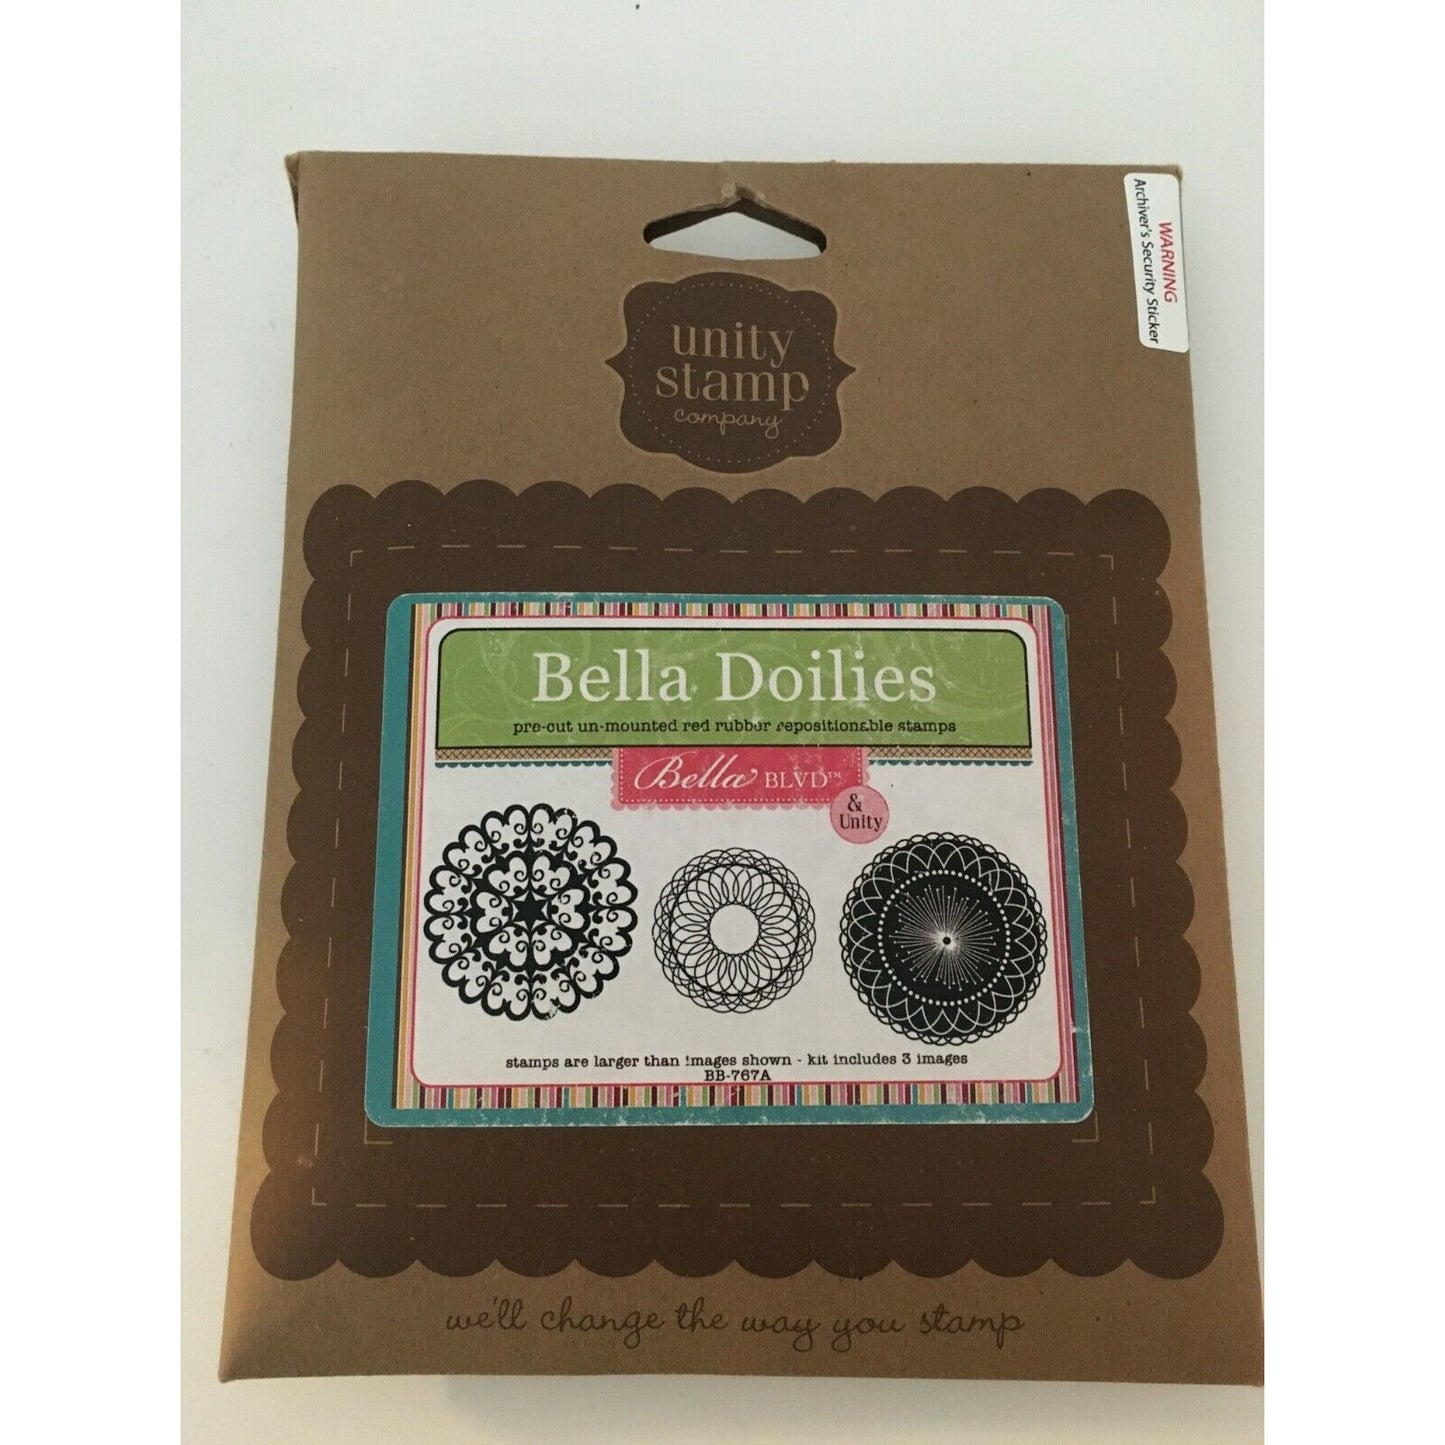 Unity Stamp Company Bella Doilies Red Rubber Repositionable Stamps Unmounted New